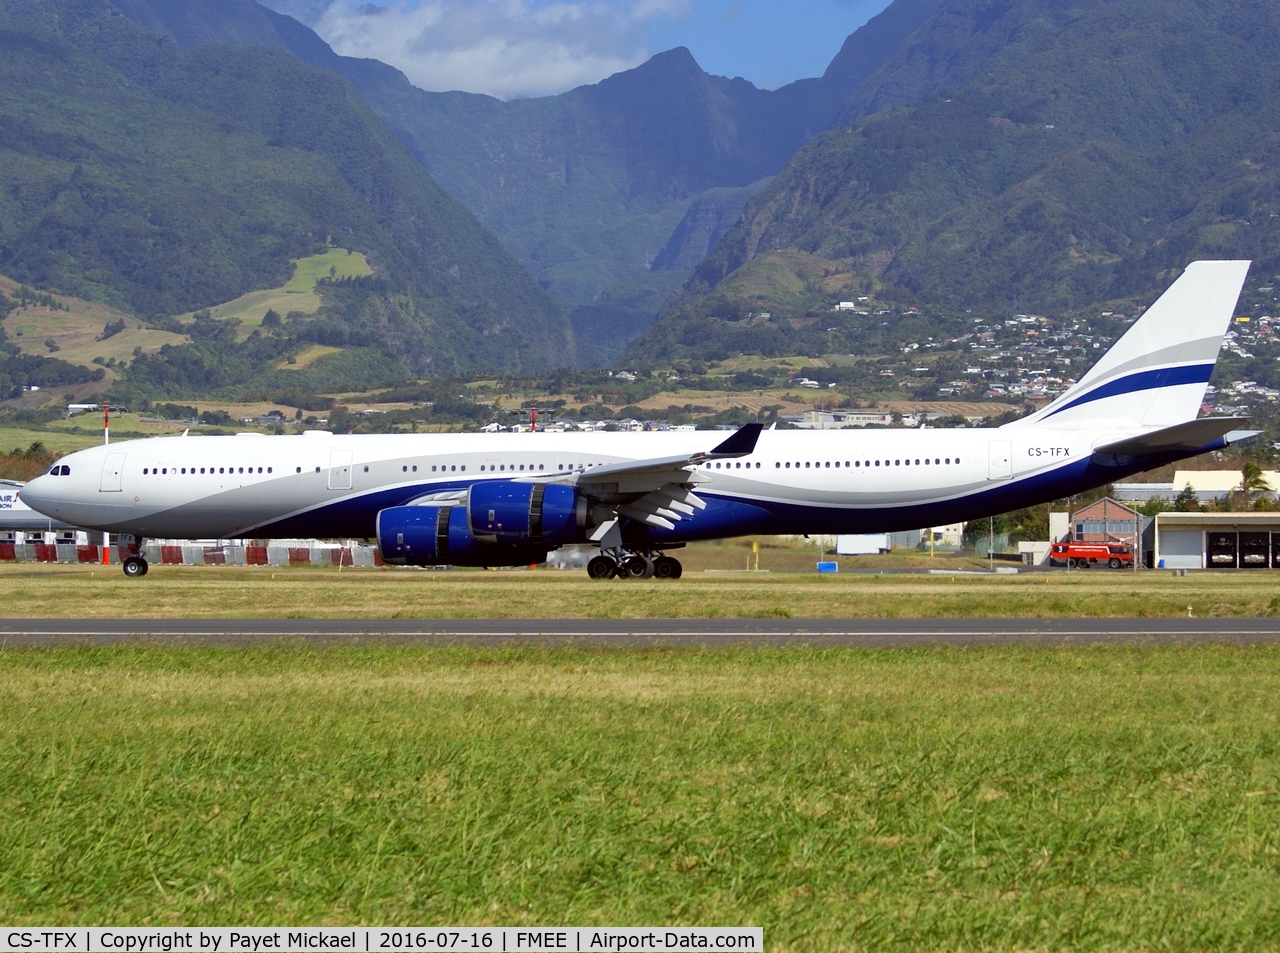 CS-TFX, 2008 Airbus A340-541 C/N 912, Flying for Air Austral